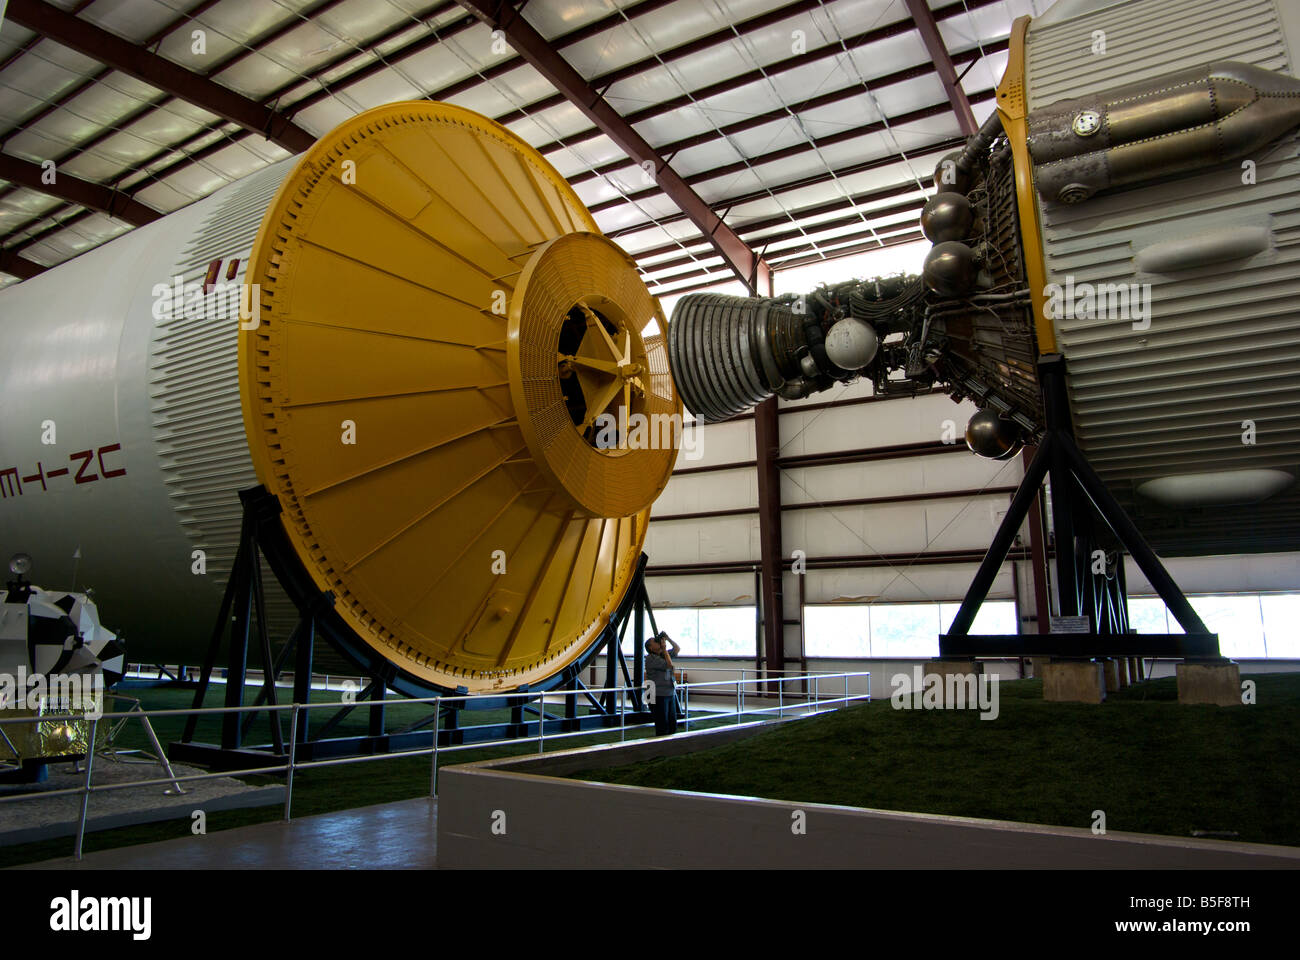 Massive Saturn V rocket used in the Apollo space missions to the moon on display at the Johnson Space Center Stock Photo